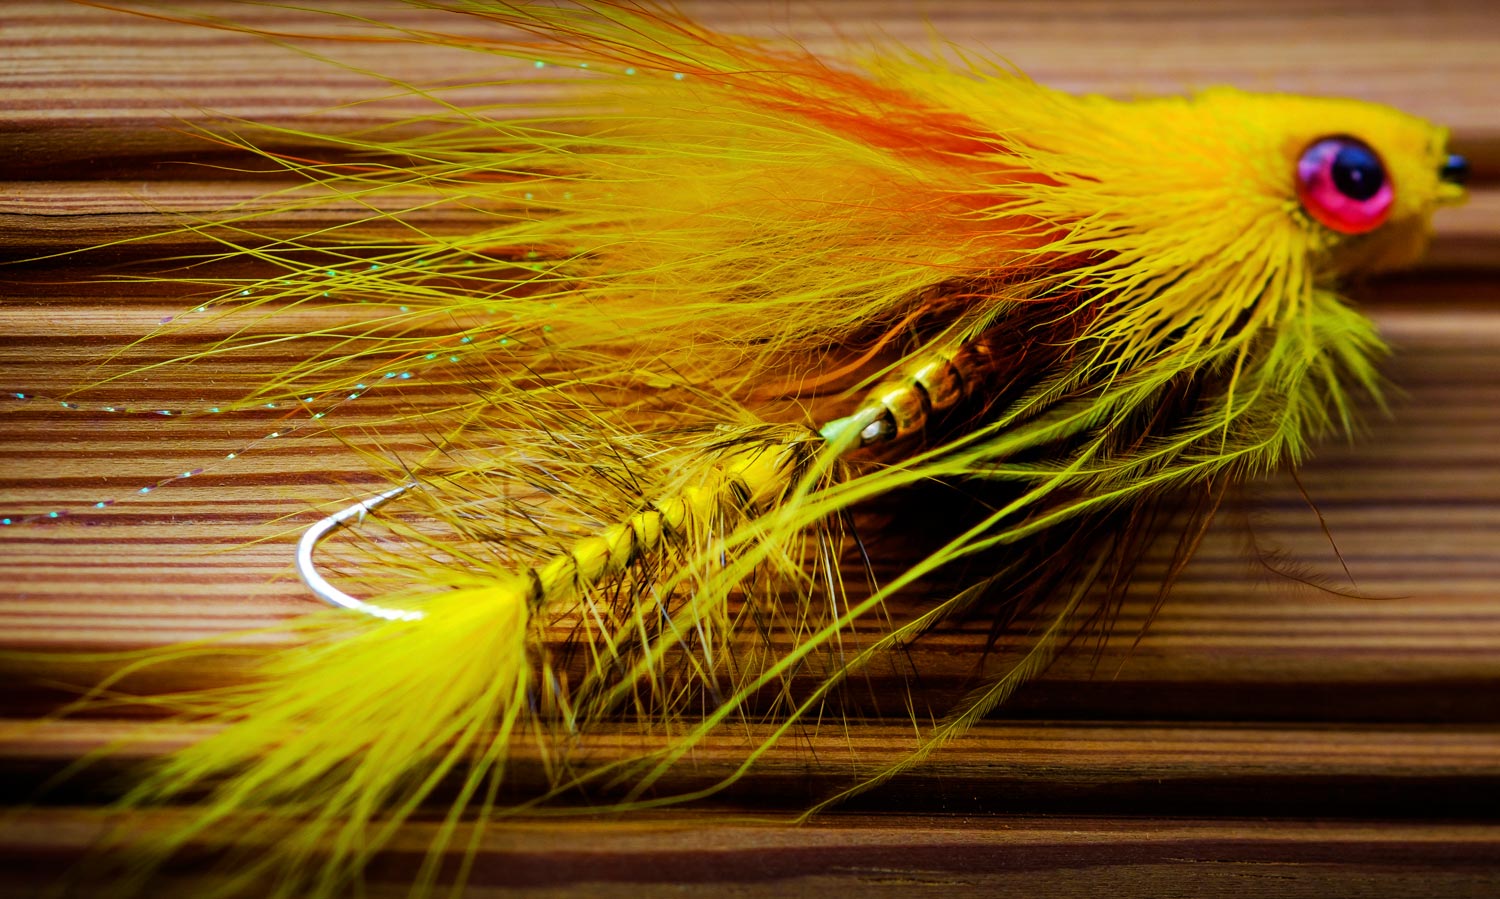 trout flies - Fly Fishing, Gink and Gasoline, How to Fly Fish, Trout  Fishing, Fly Tying